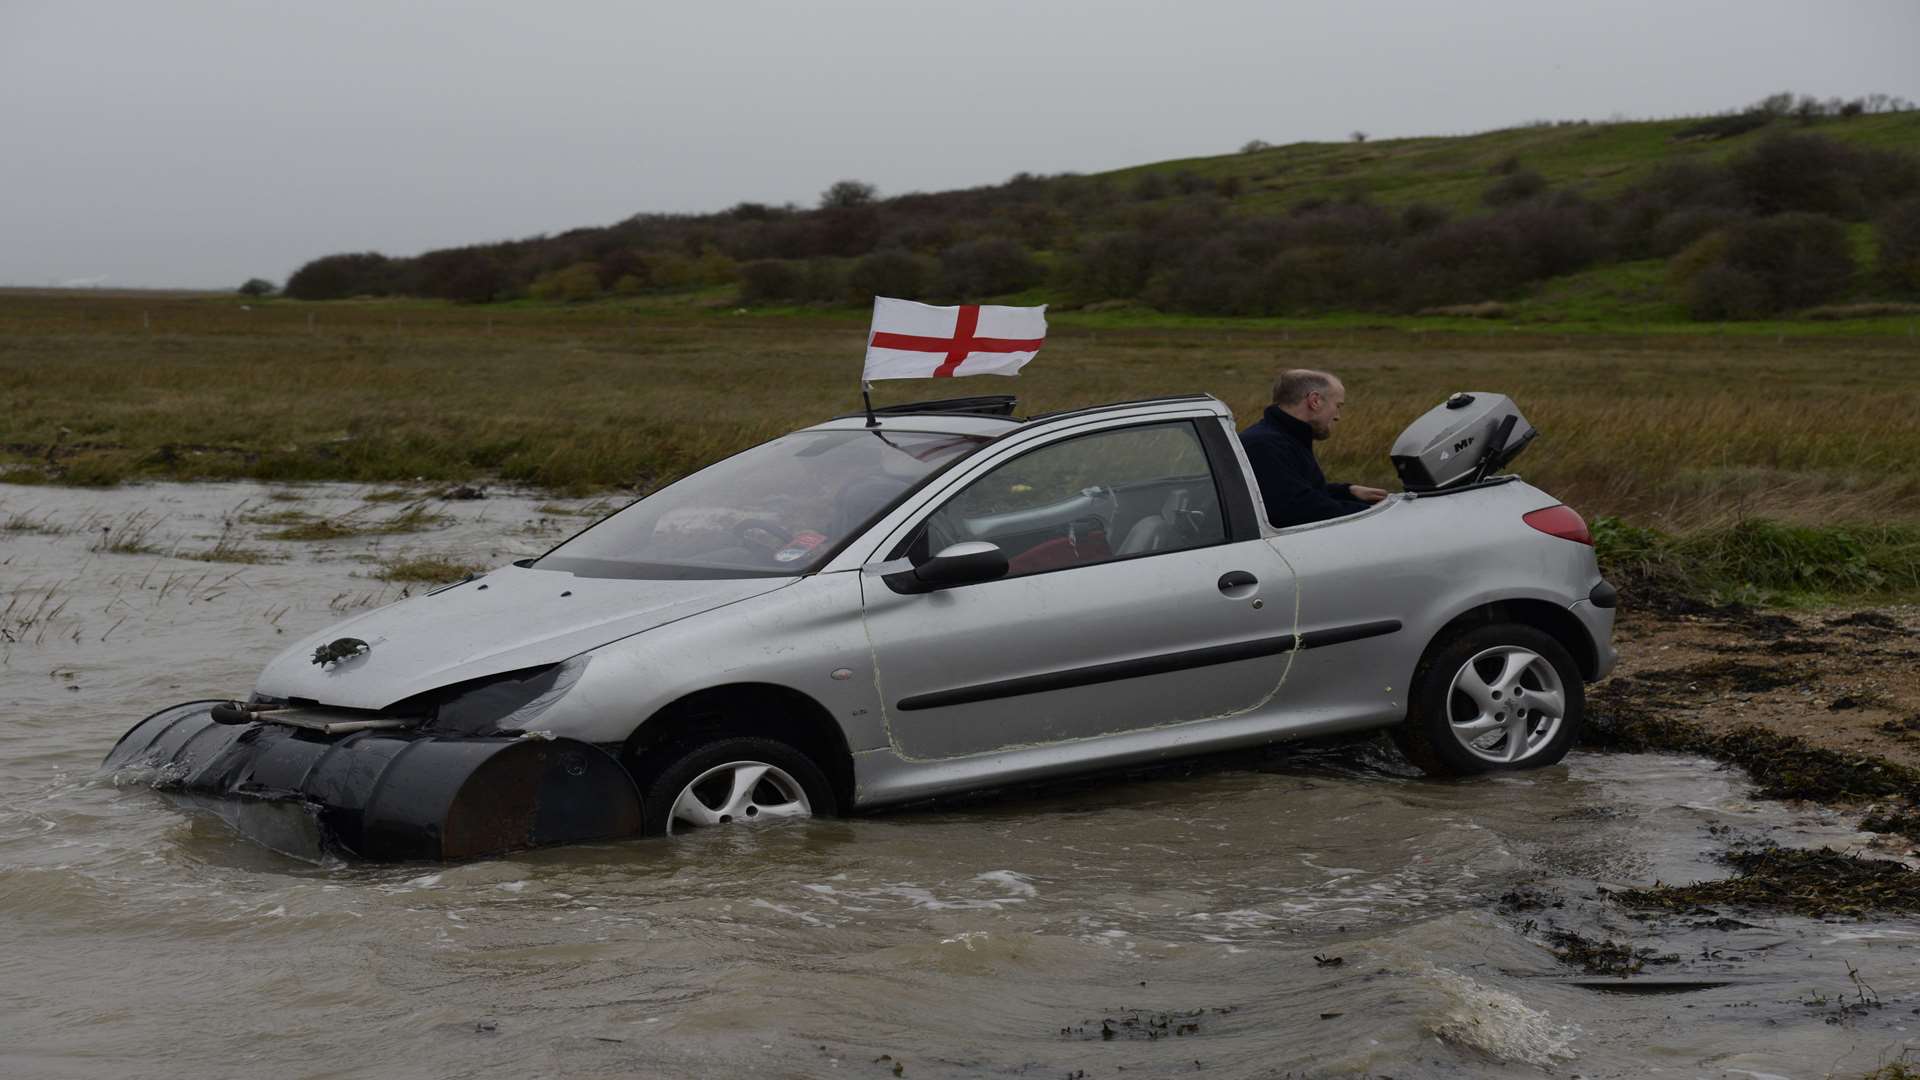 The Peugeot 206 enters the Swale